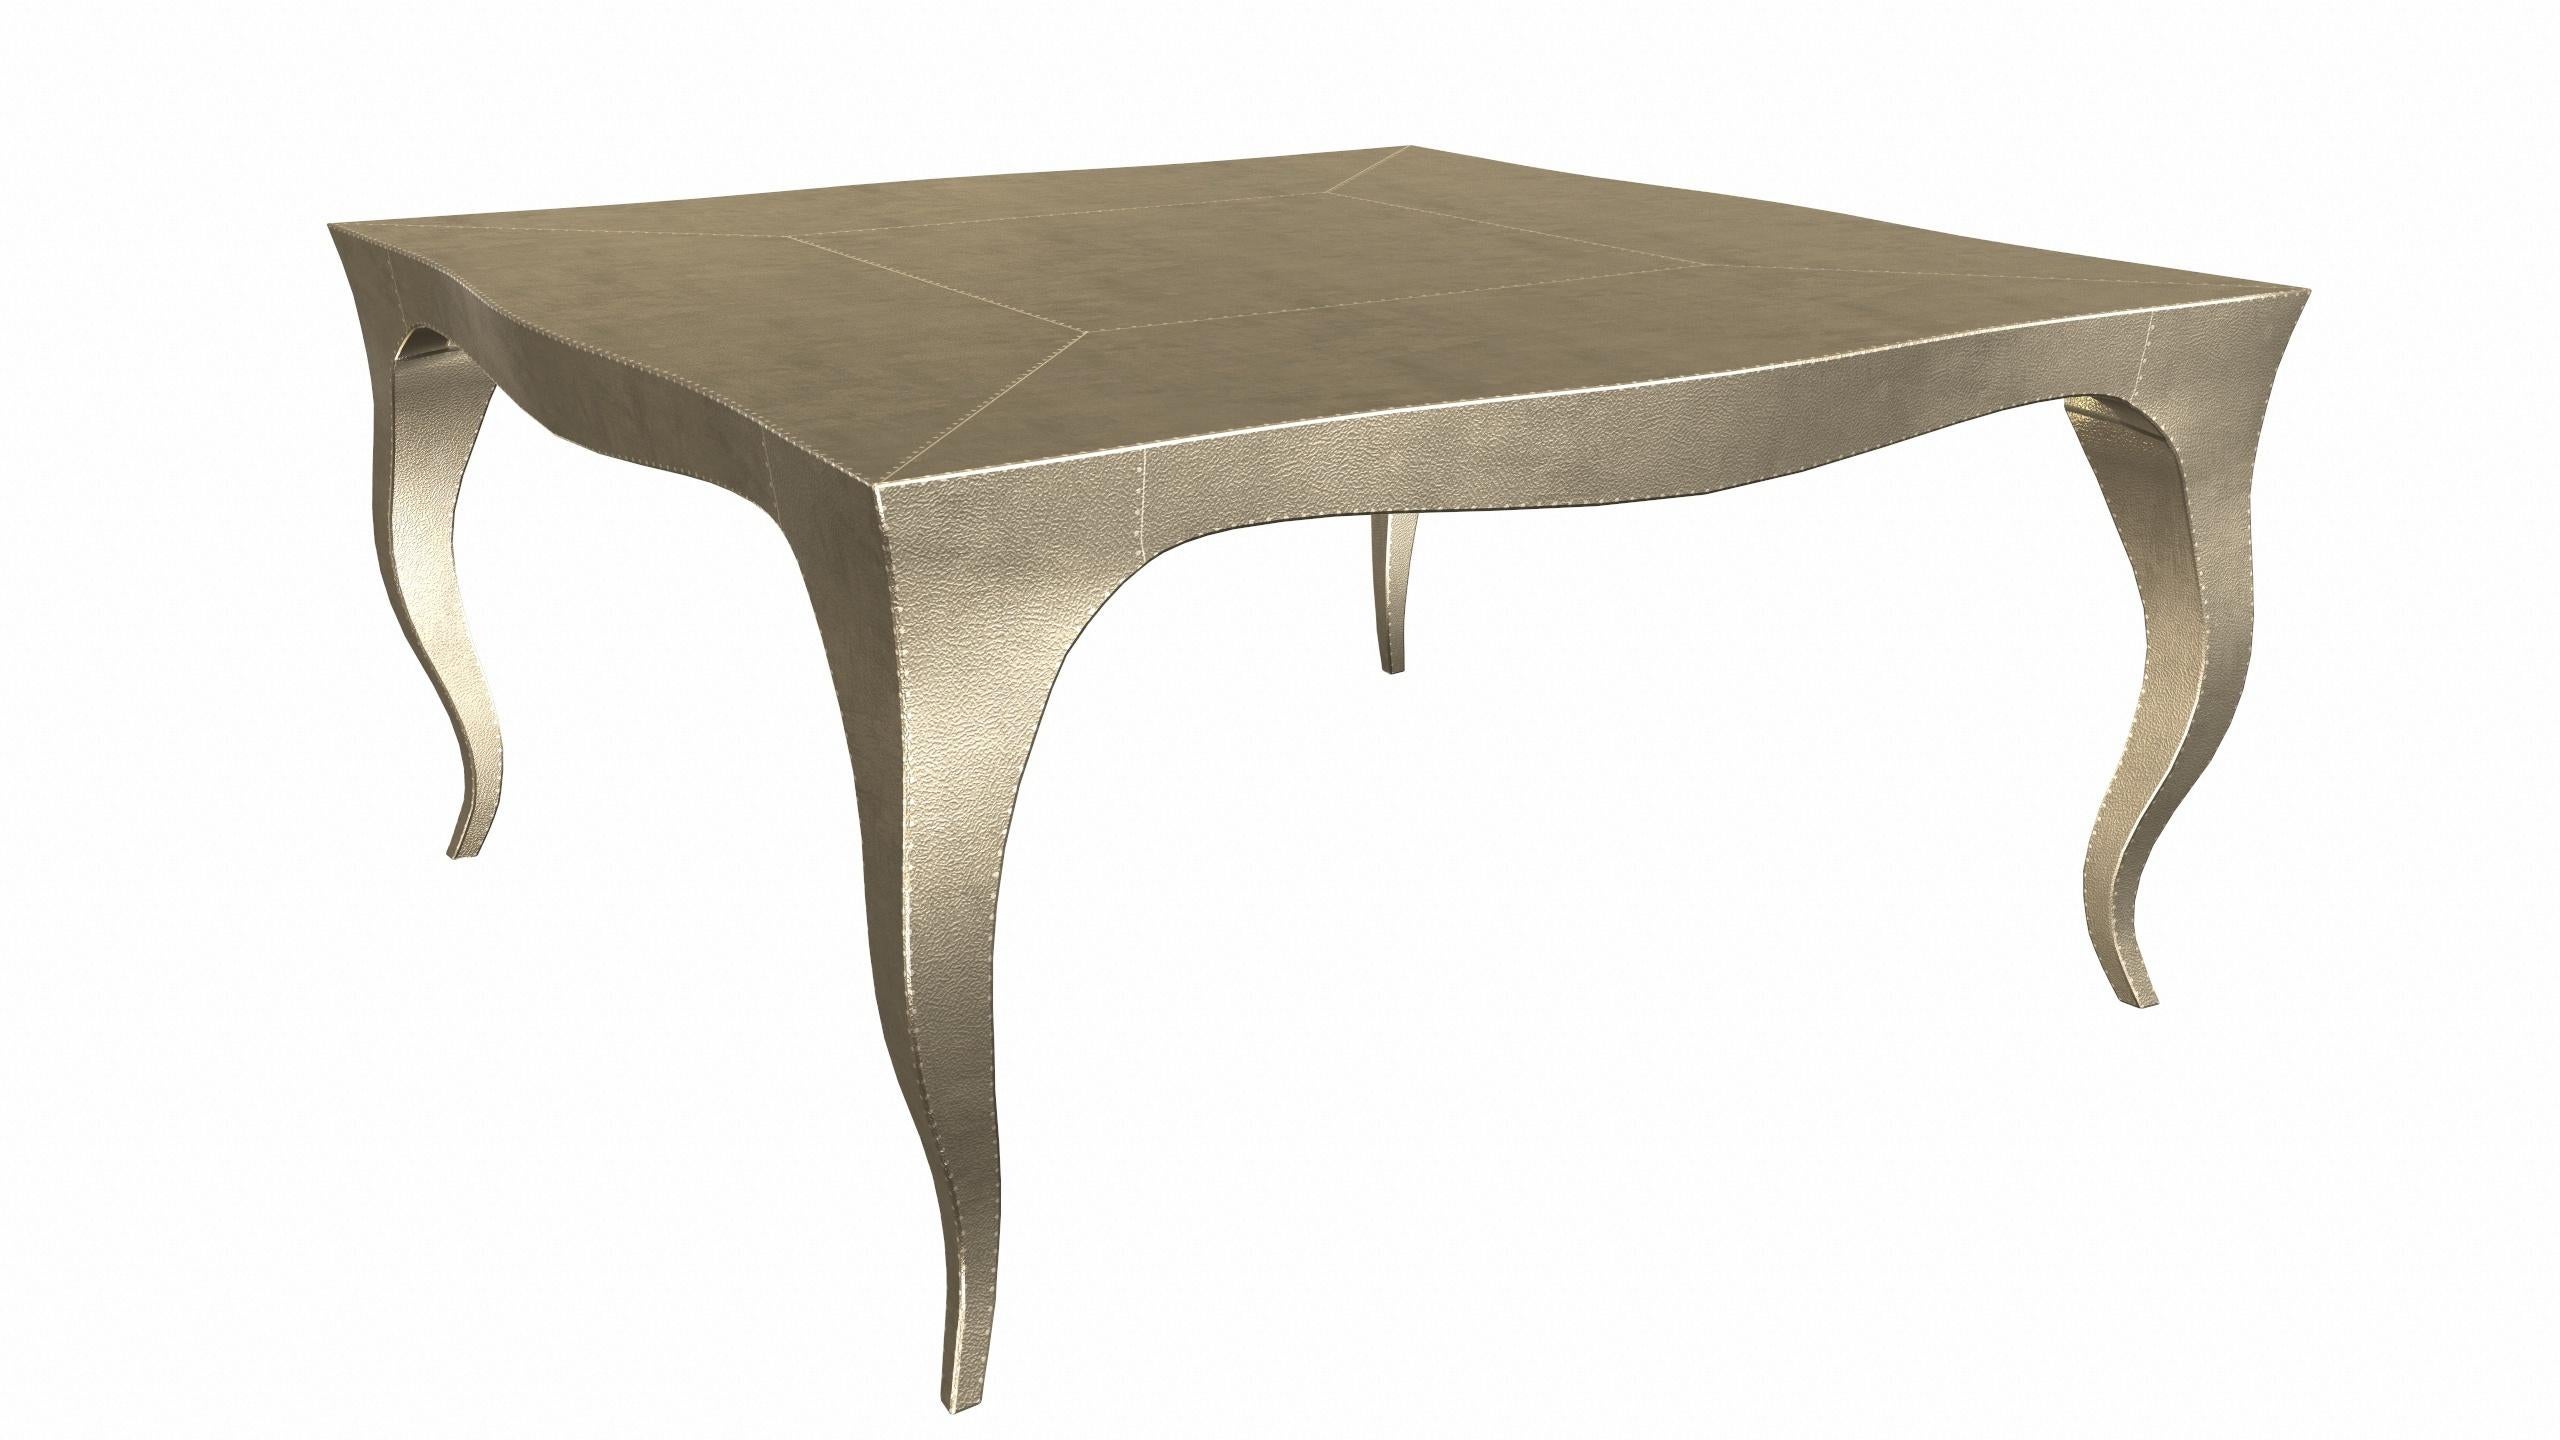 Louise Art Deco Nesting Tables Fine Hammered Brass 18.5x18.5x10 inch by Paul M. Neuf - En vente à New York, NY